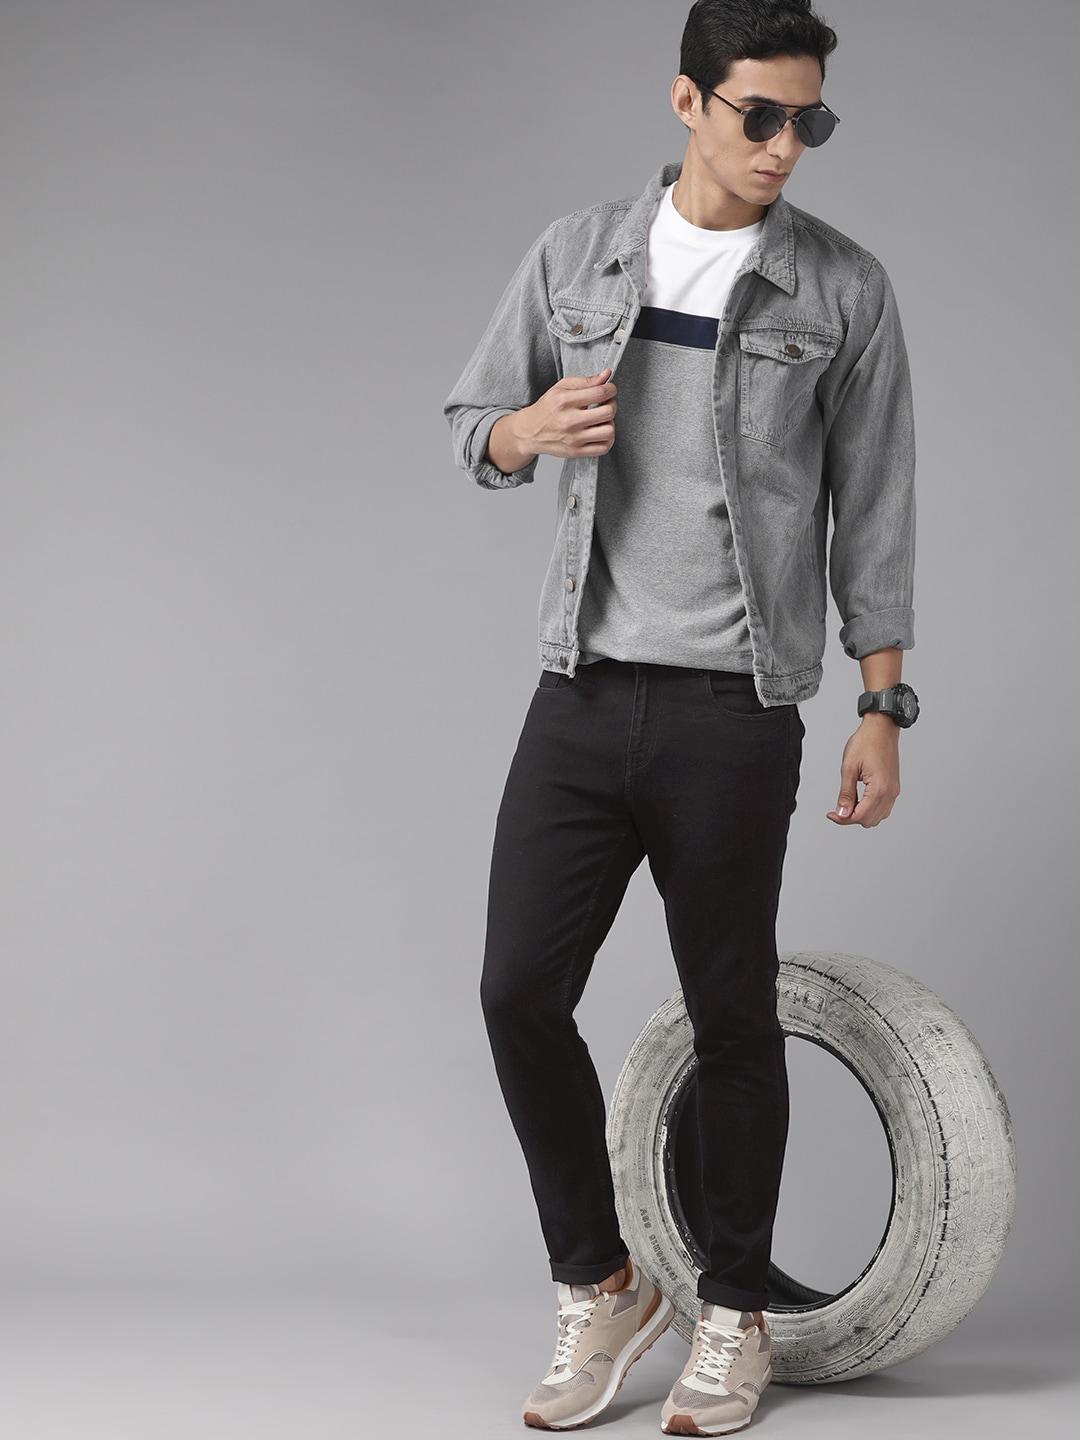 the-roadster-lifestyle-co.-men-mid-rise-tapered-fit-stretchable-jeans